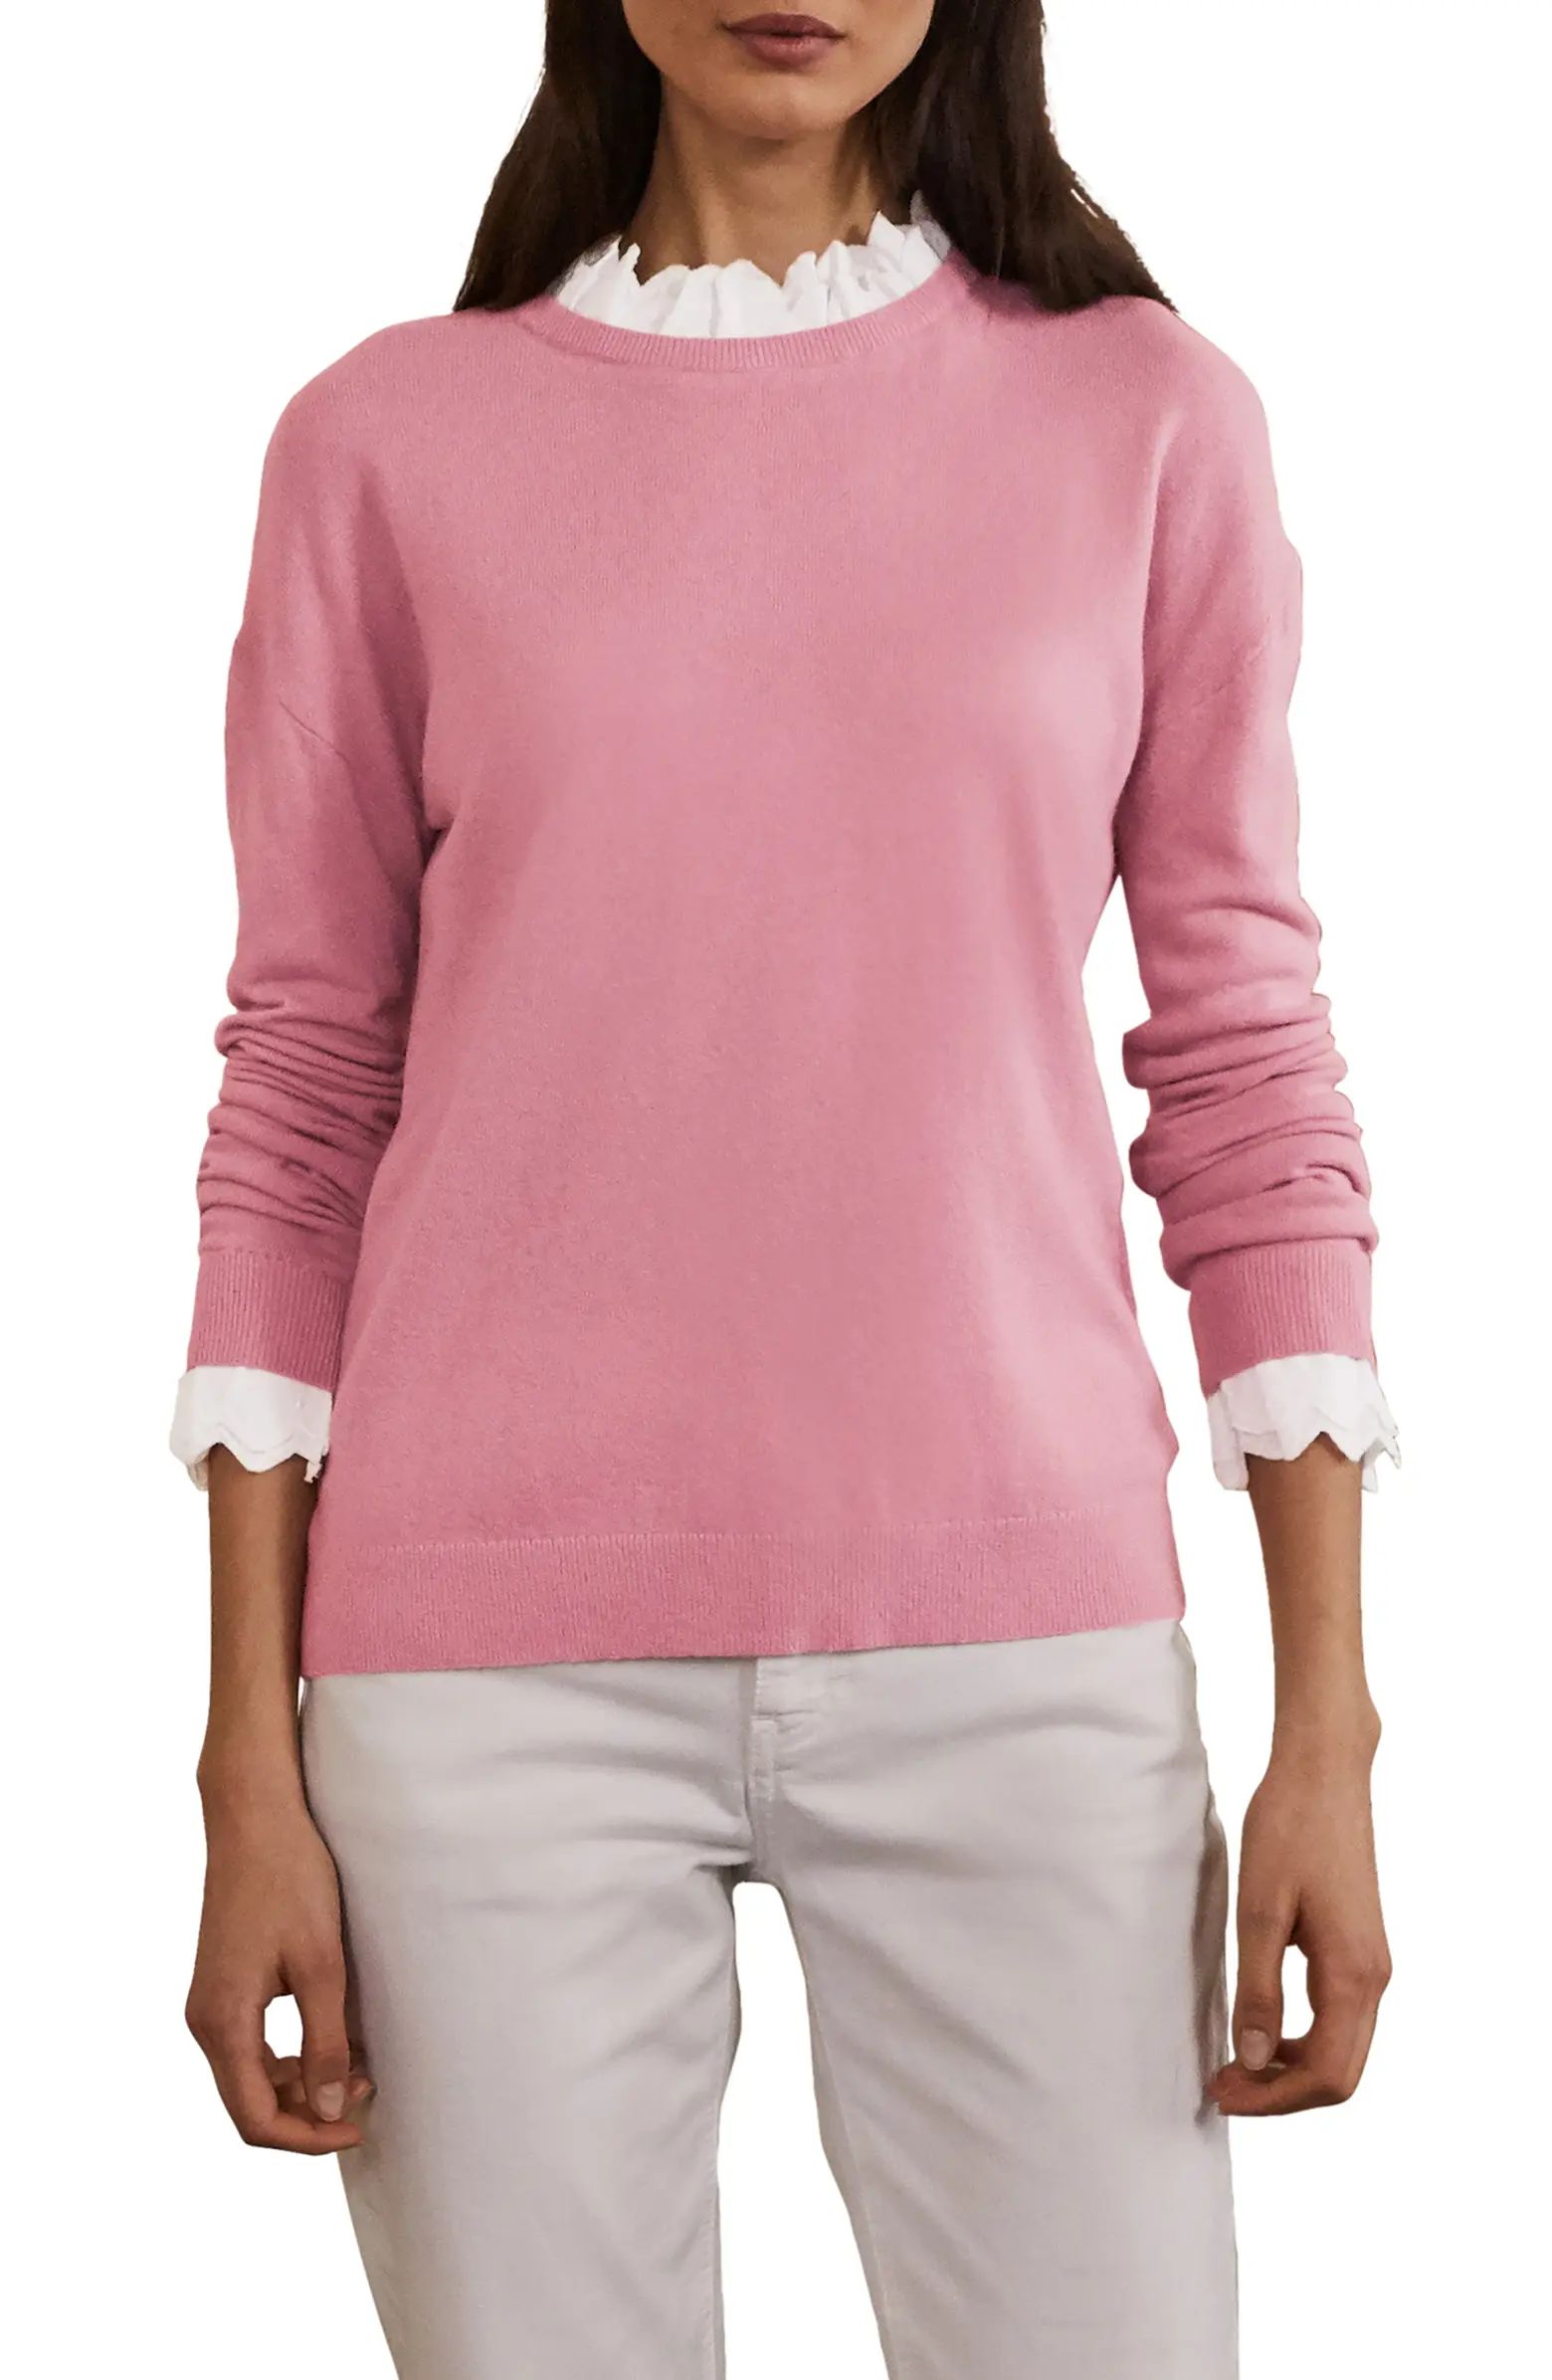 Boden Lydia Woven Frill Trim Sweater | Nordstrom | Nordstrom